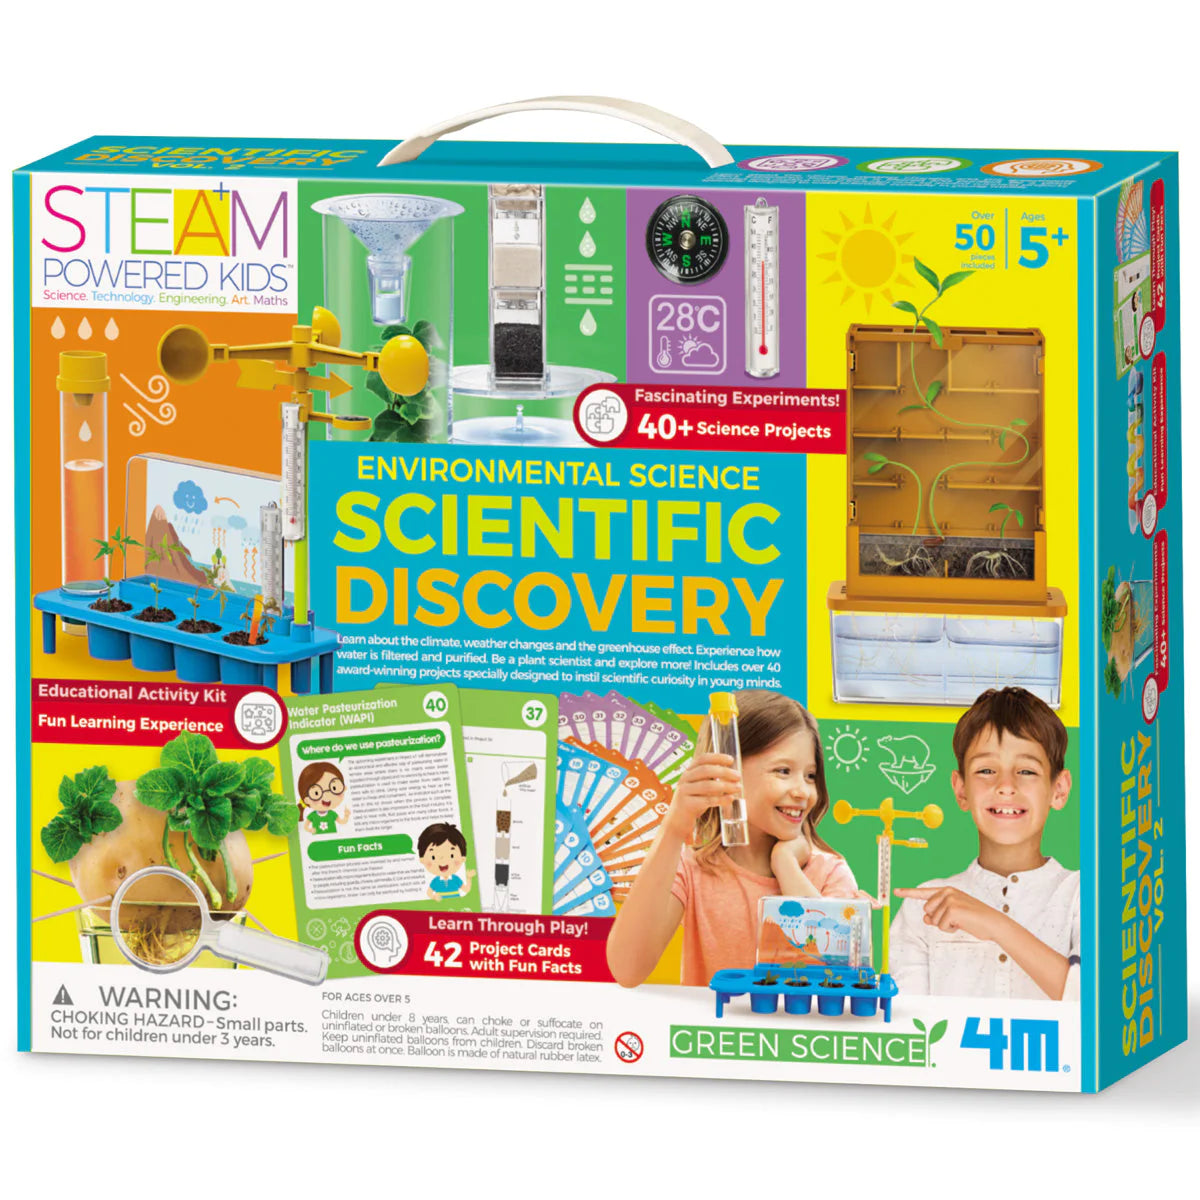 4M STEAM Powered Kids Scientific Discovery Vol 2 Environmental Science